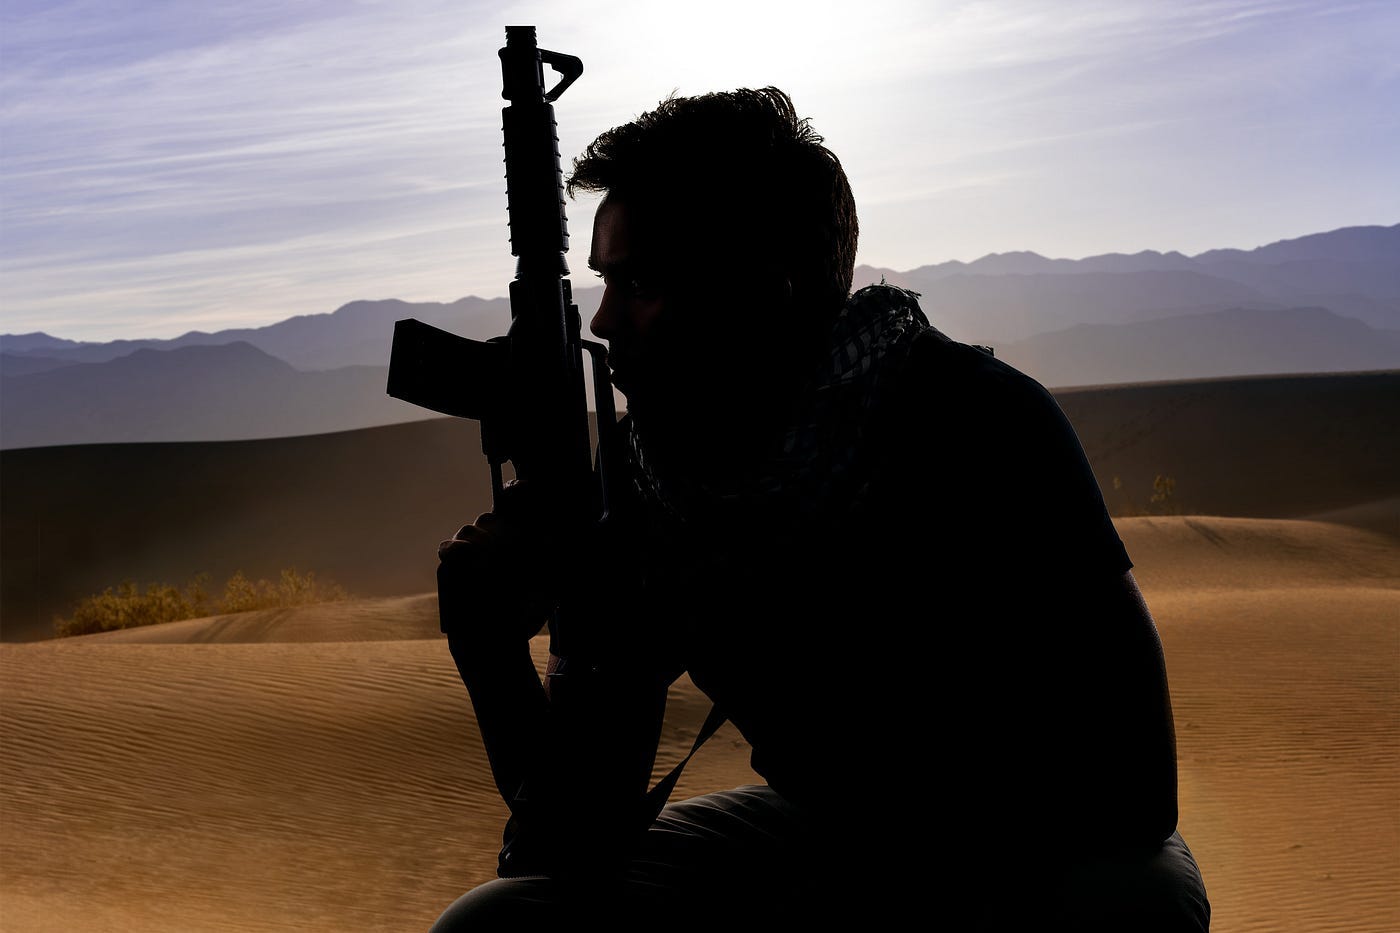 A soldier in the desert, holding his rifle, appears homesick.